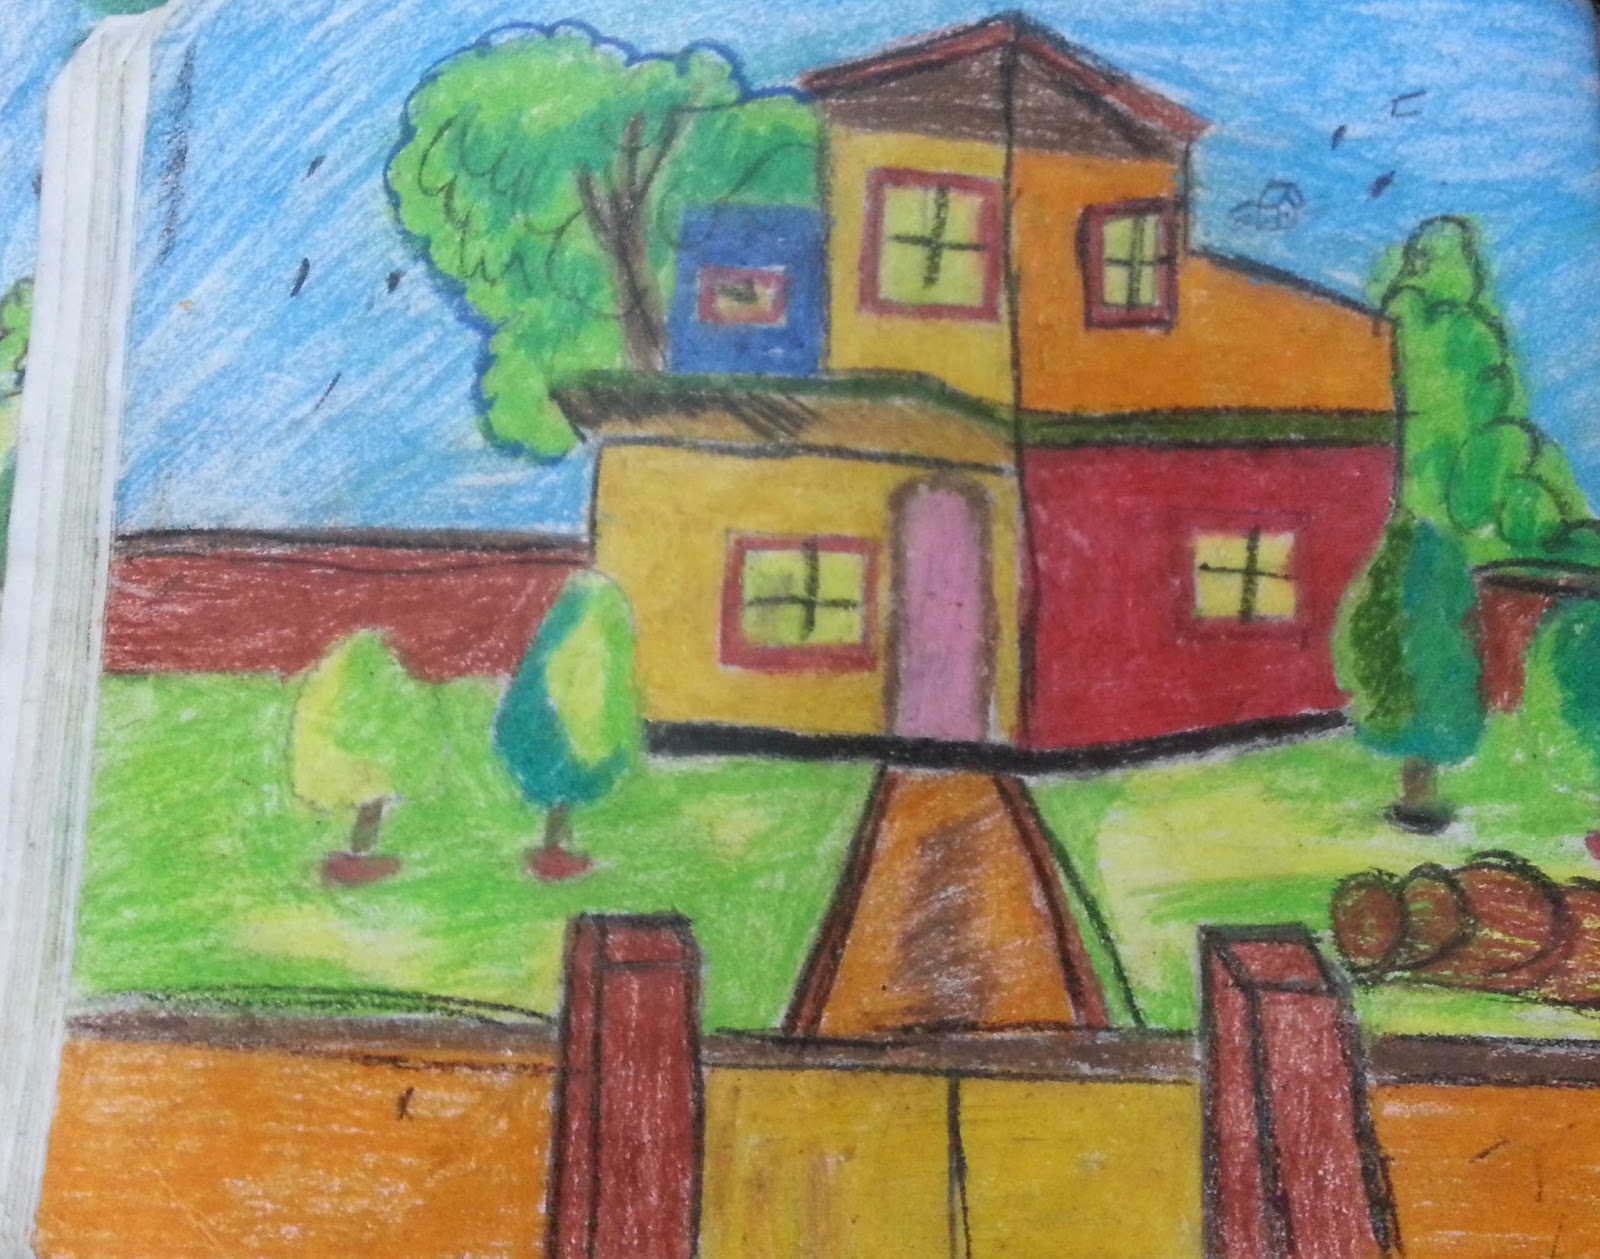 Beautiful house drawing - Drawing and Painting